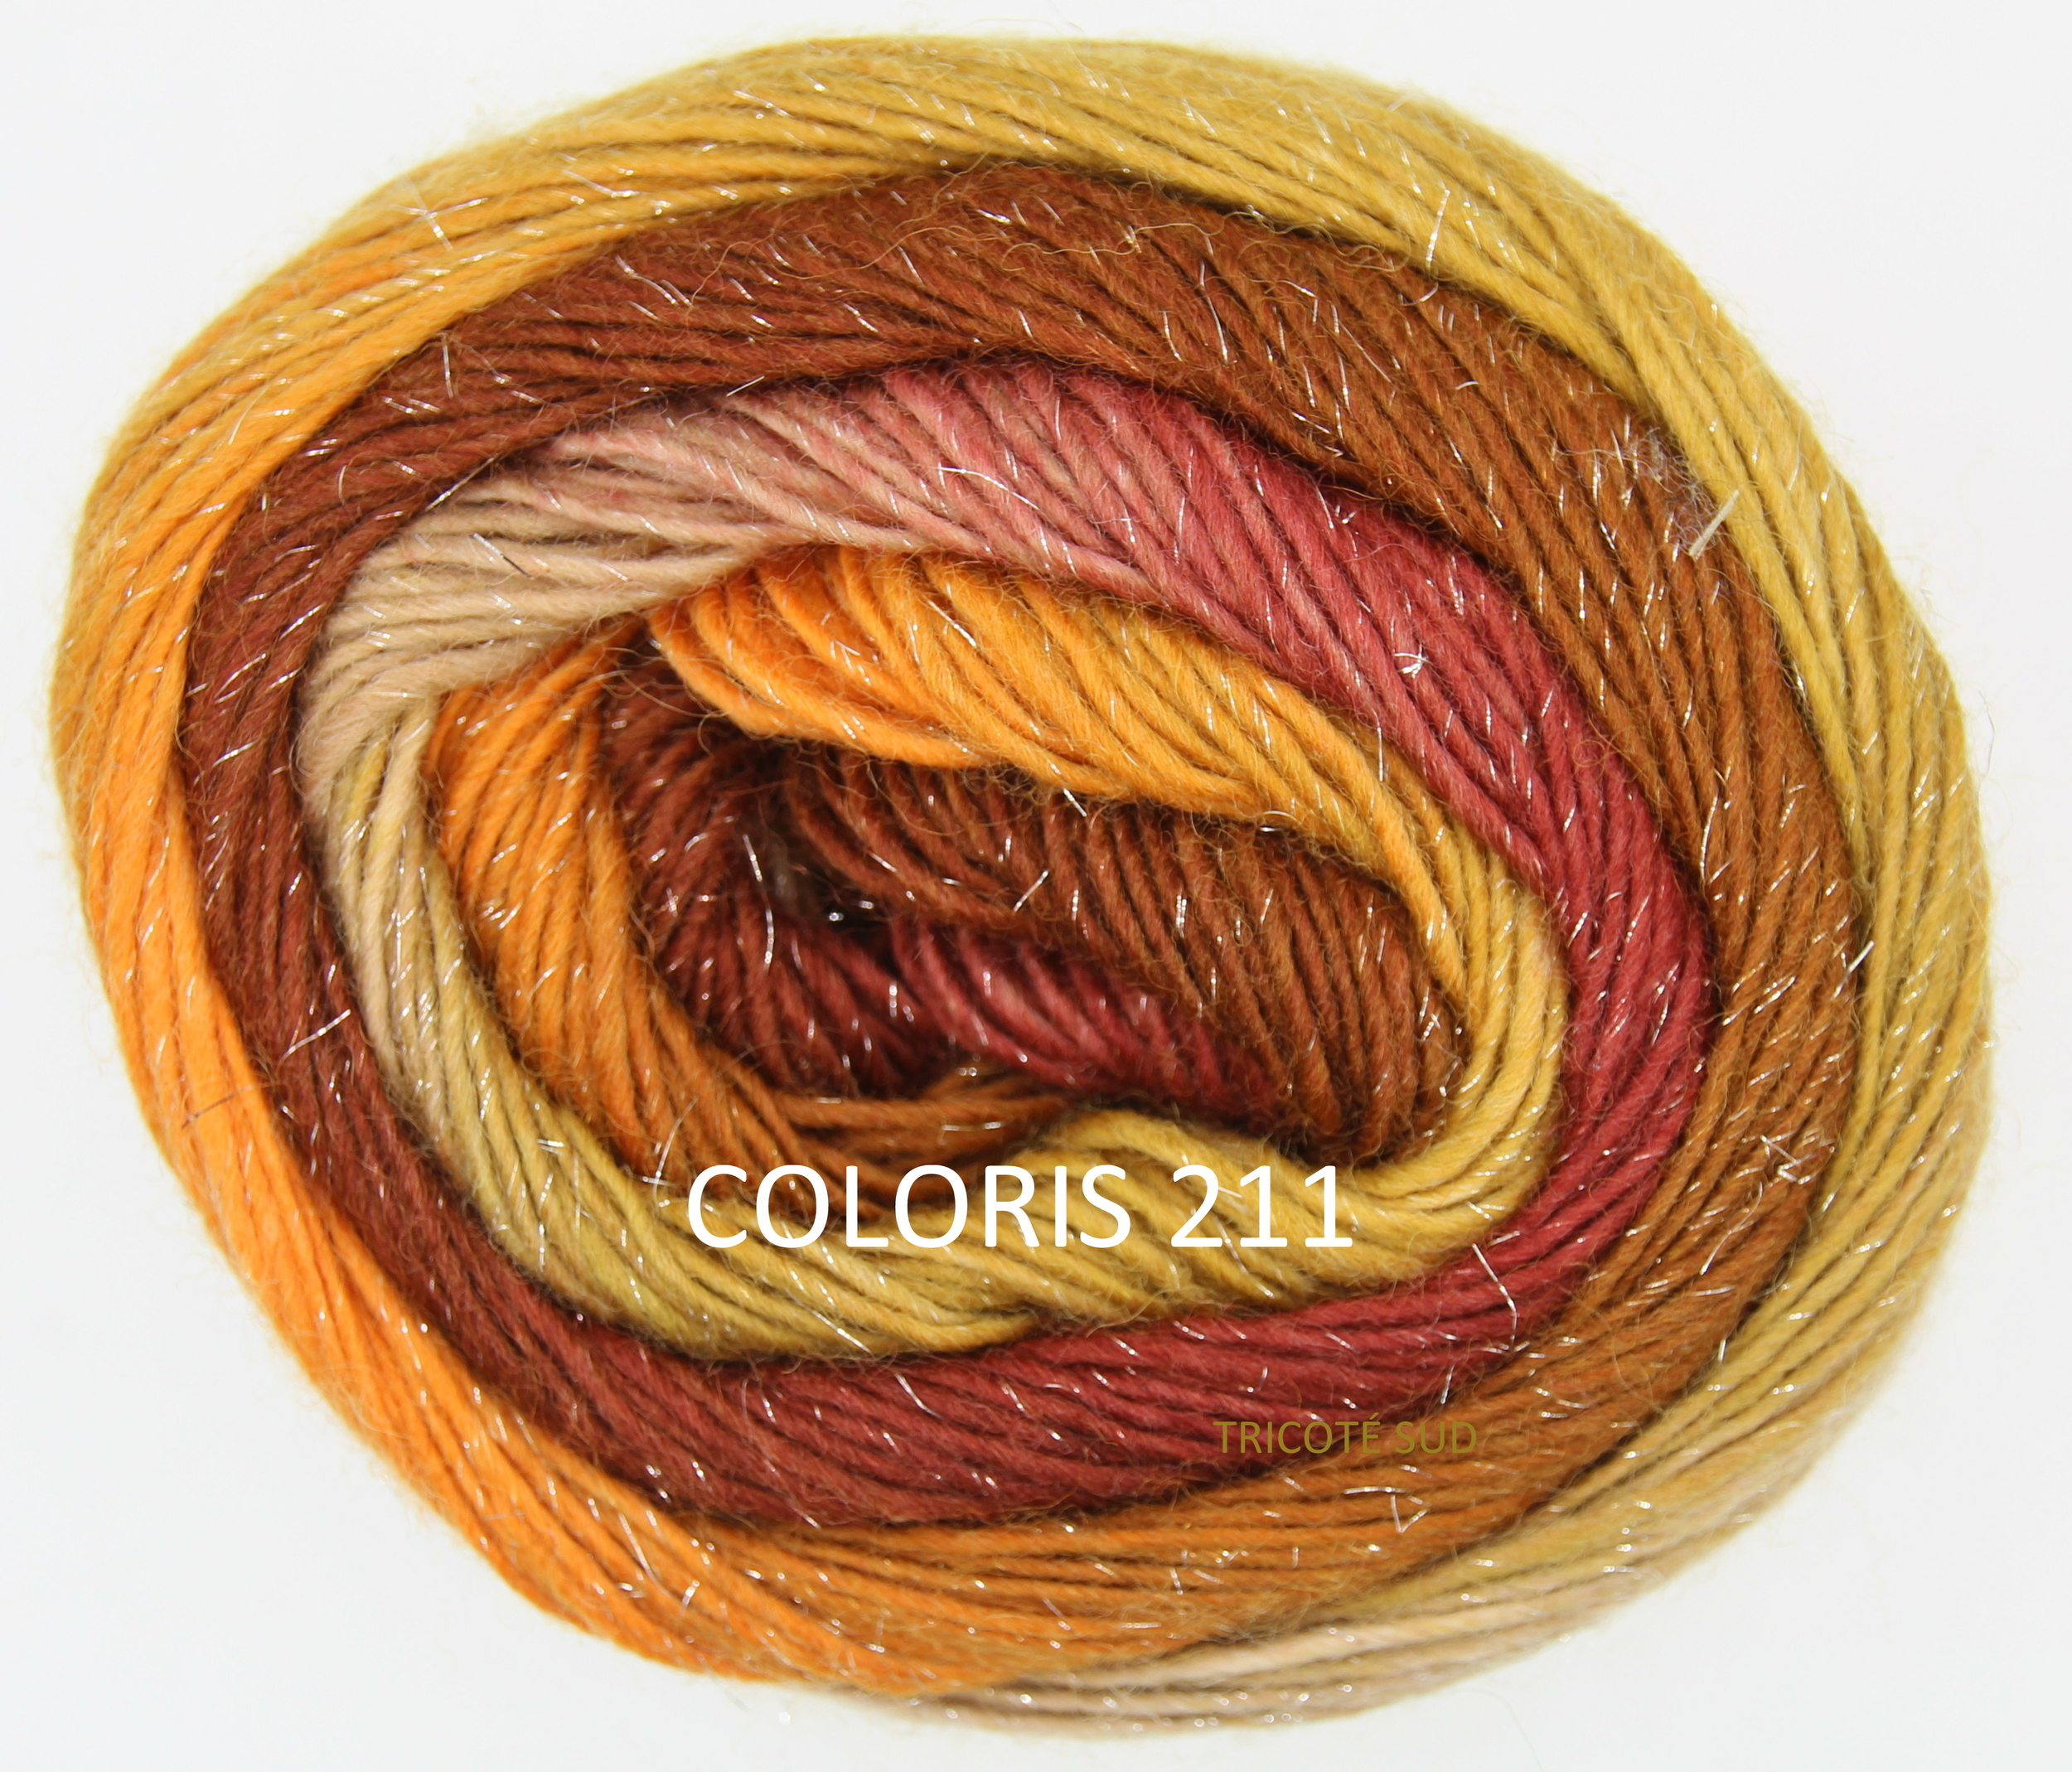 MILLE COLORI SOCKS AND LACE LUXE COLORIS 211 (1)